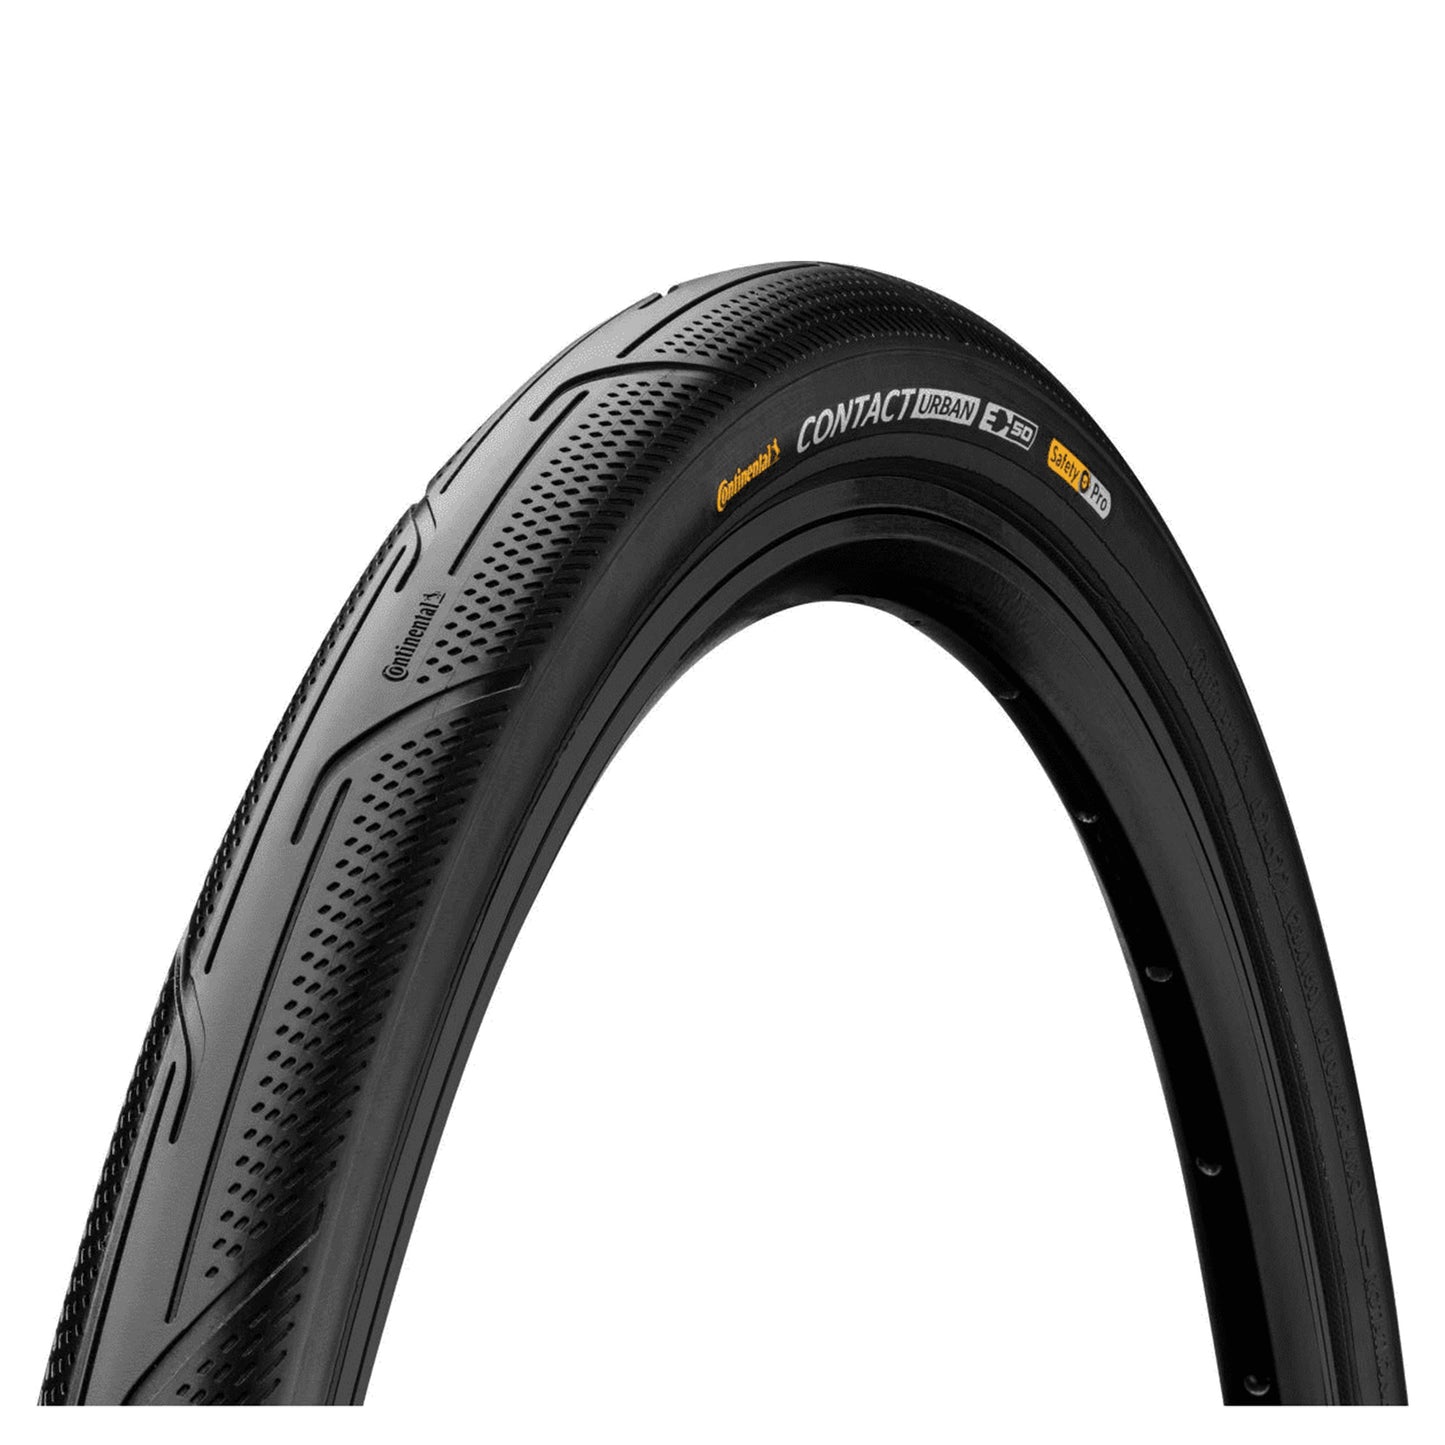 CONTINENTAL CONTACT URBAN TYRE - WIRE BEAD PUREGRIP COMPOUND